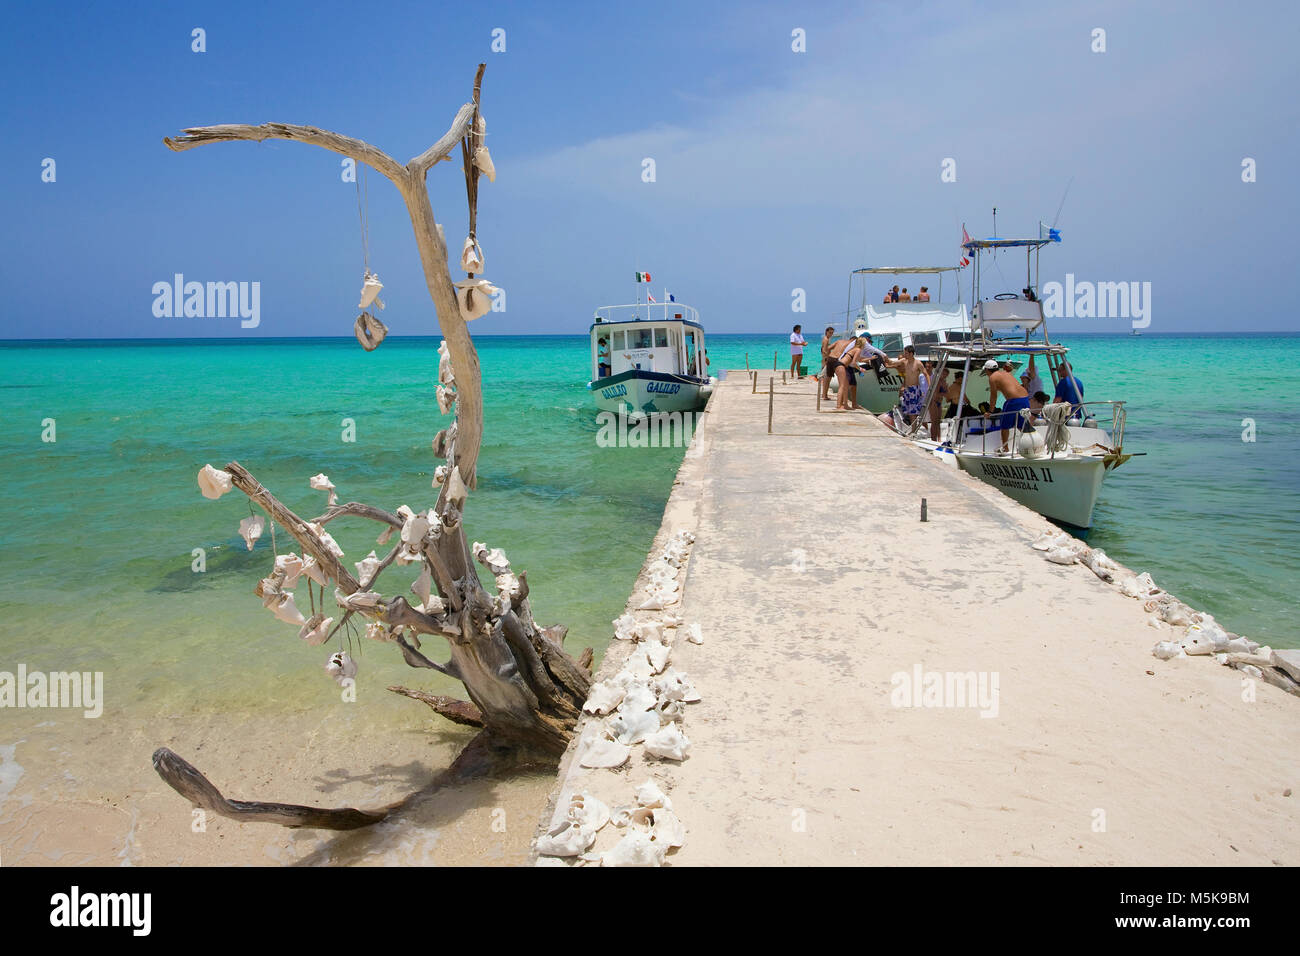 Conches hanging at dead tree, diving boat at pier, Cozumel, Mexico, Caribbean Stock Photo